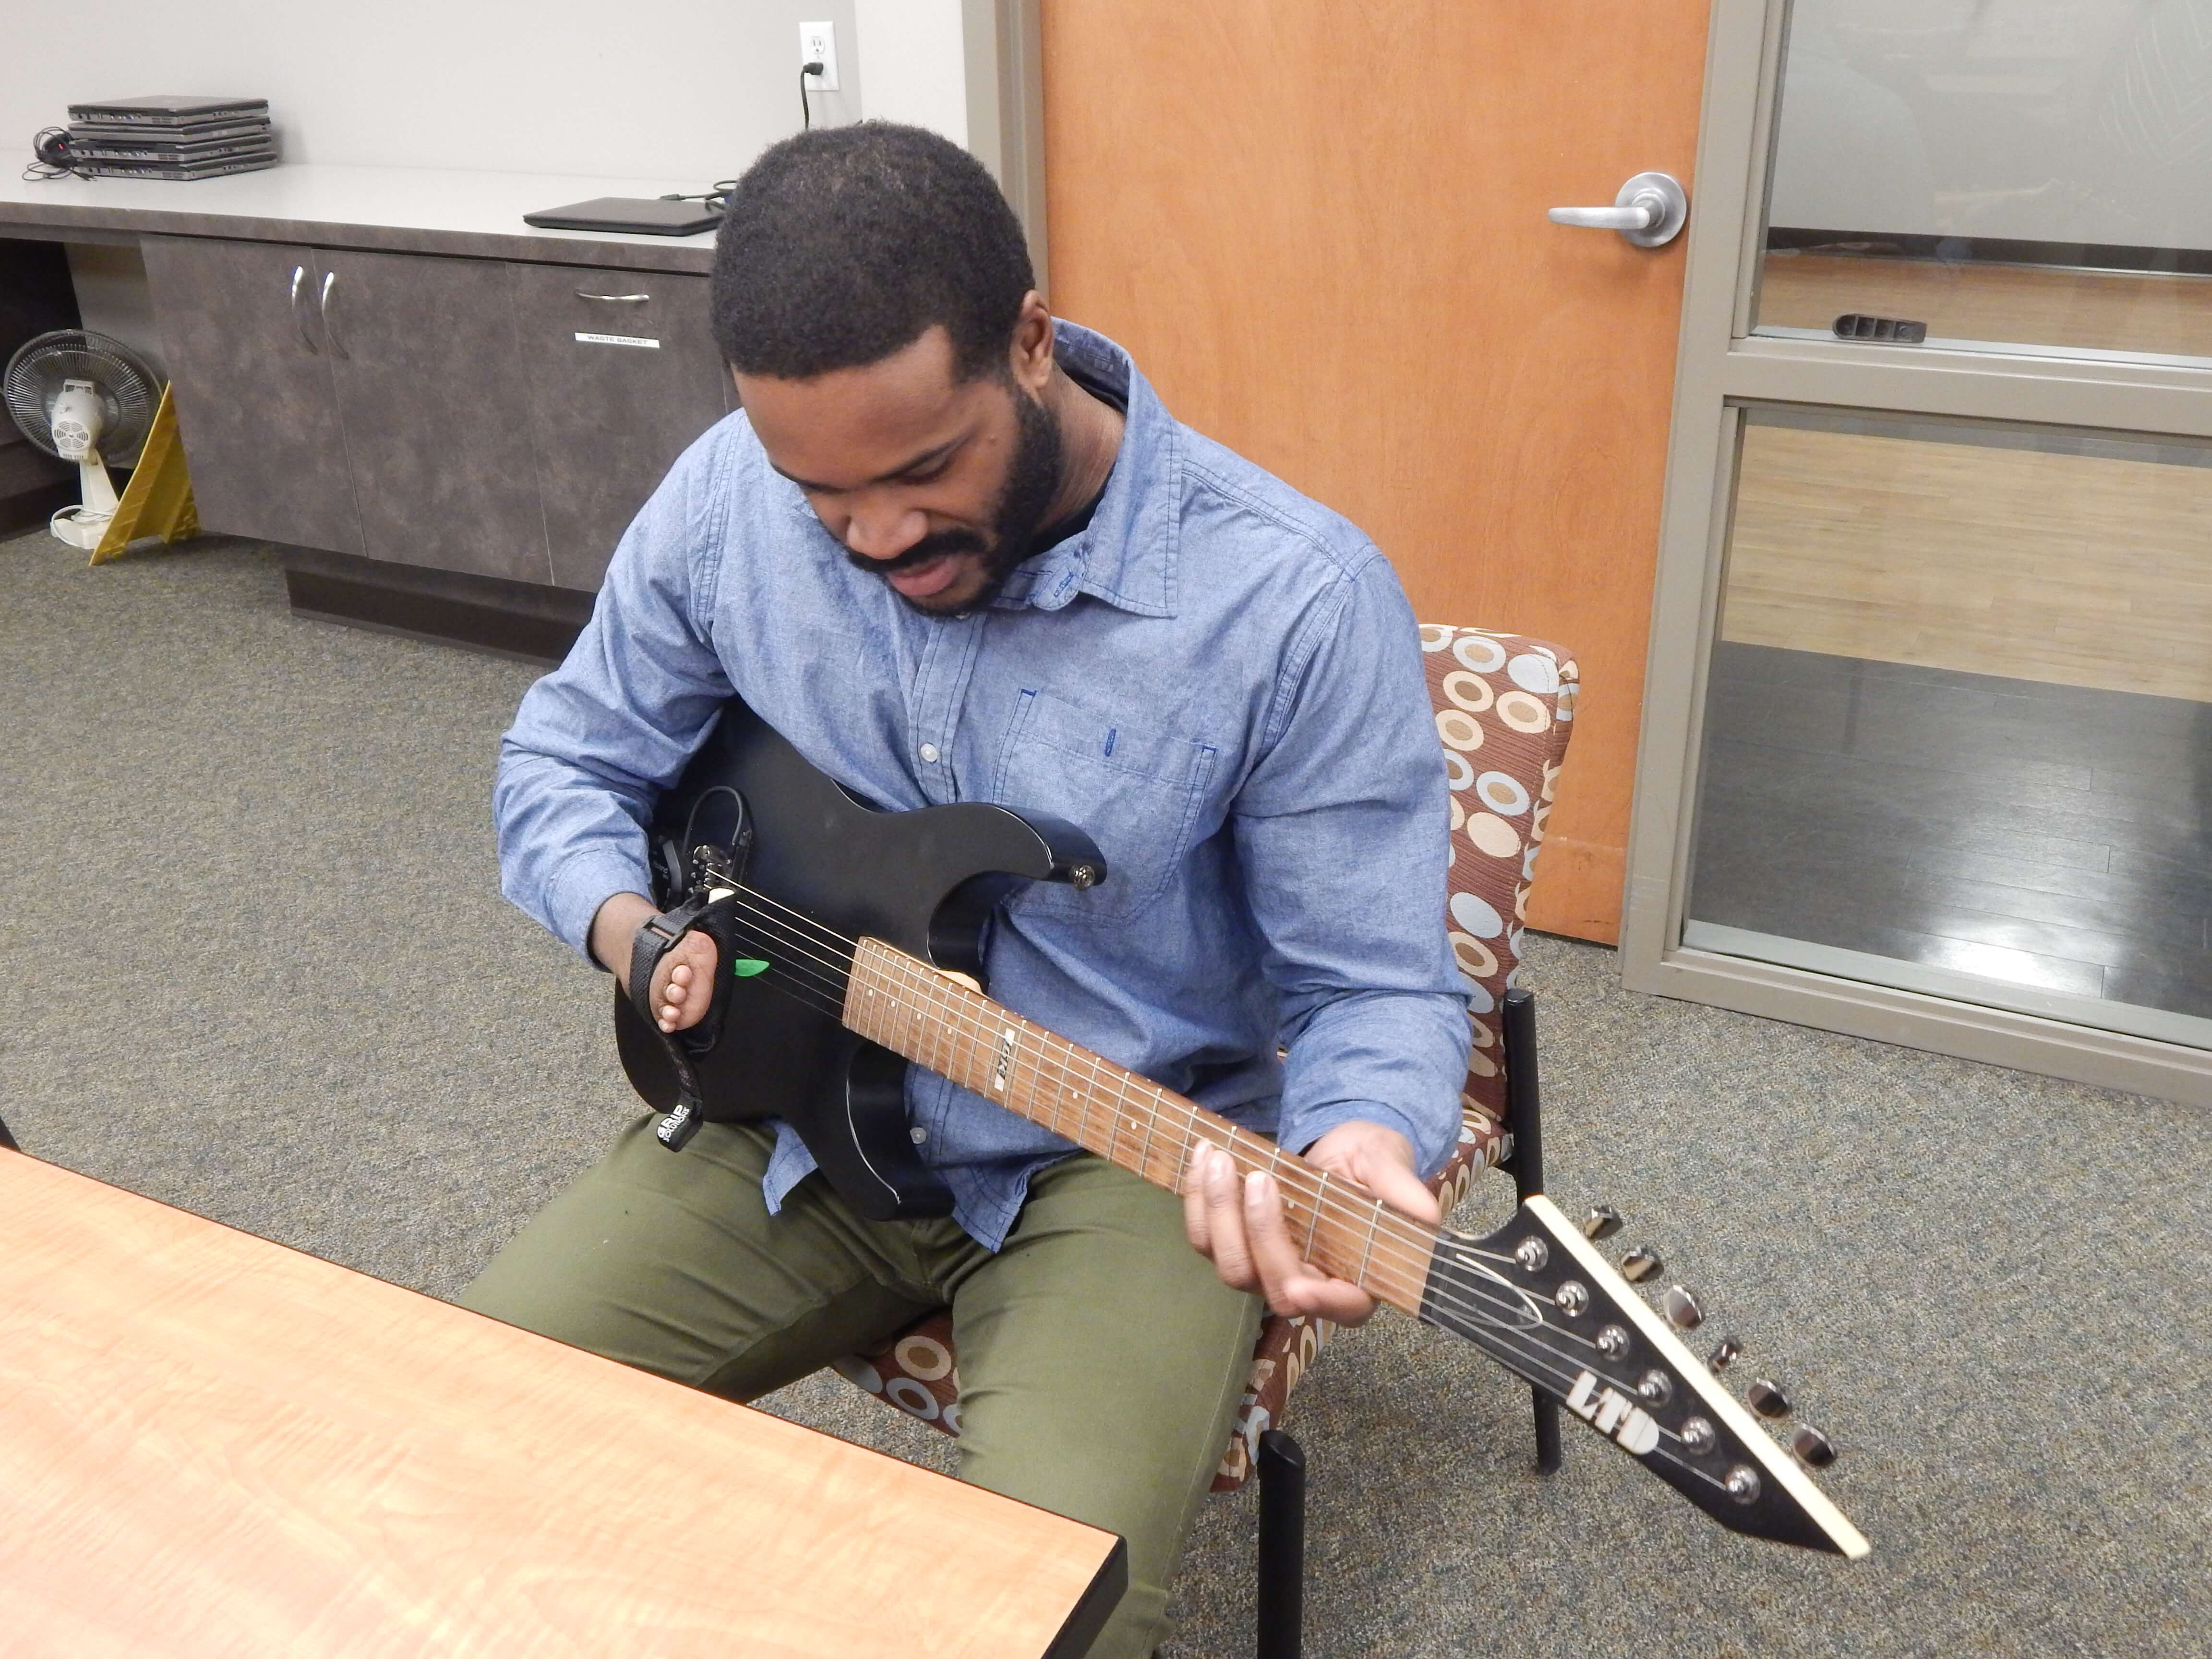 Man with limb difference plays guitar